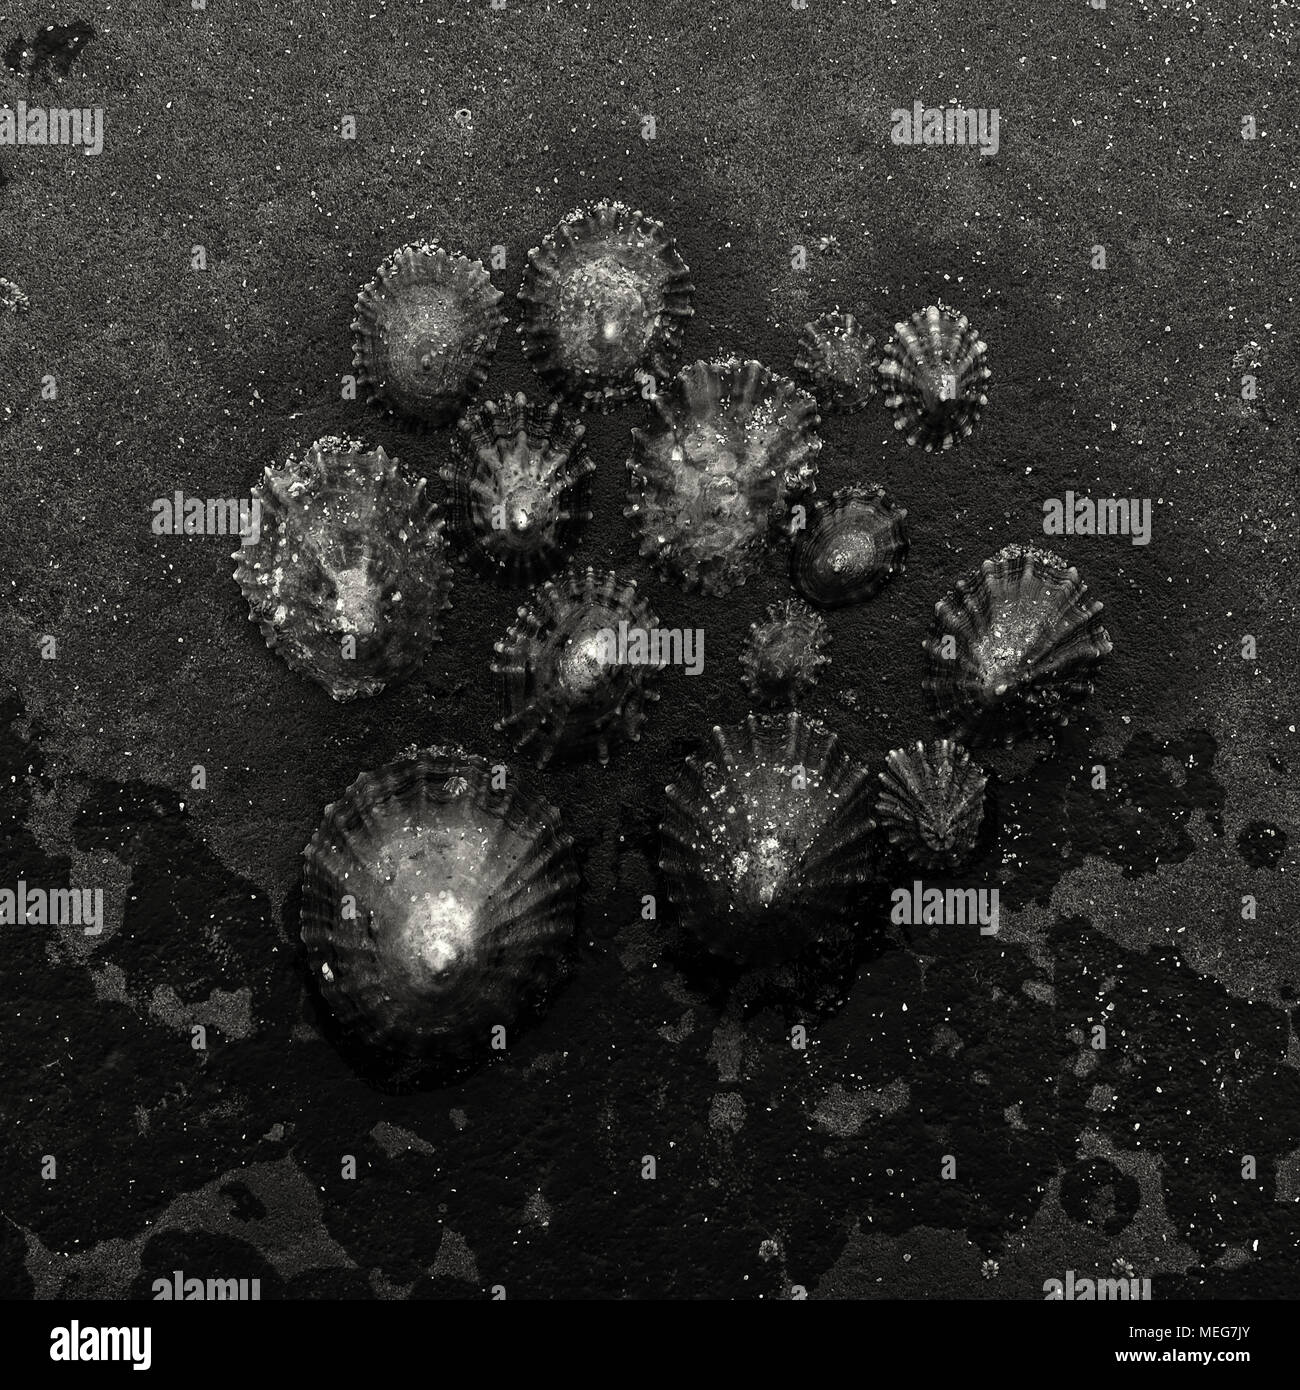 A square black and white photo of a cluster of common limpets Stock Photo